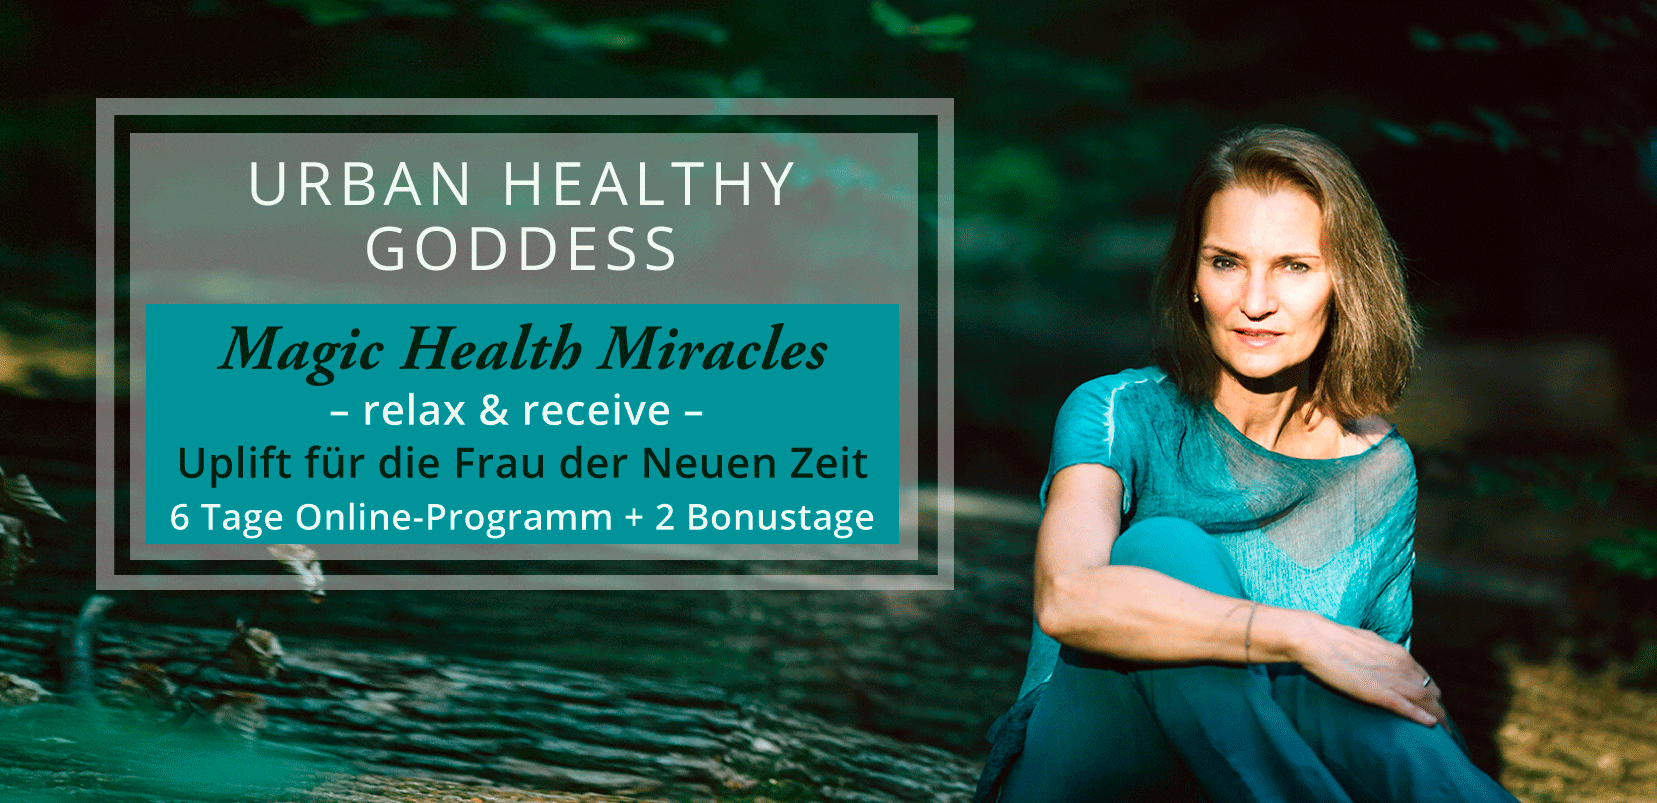 Magic Health Miracles - relax & receive,  mit Lydia Fillbach